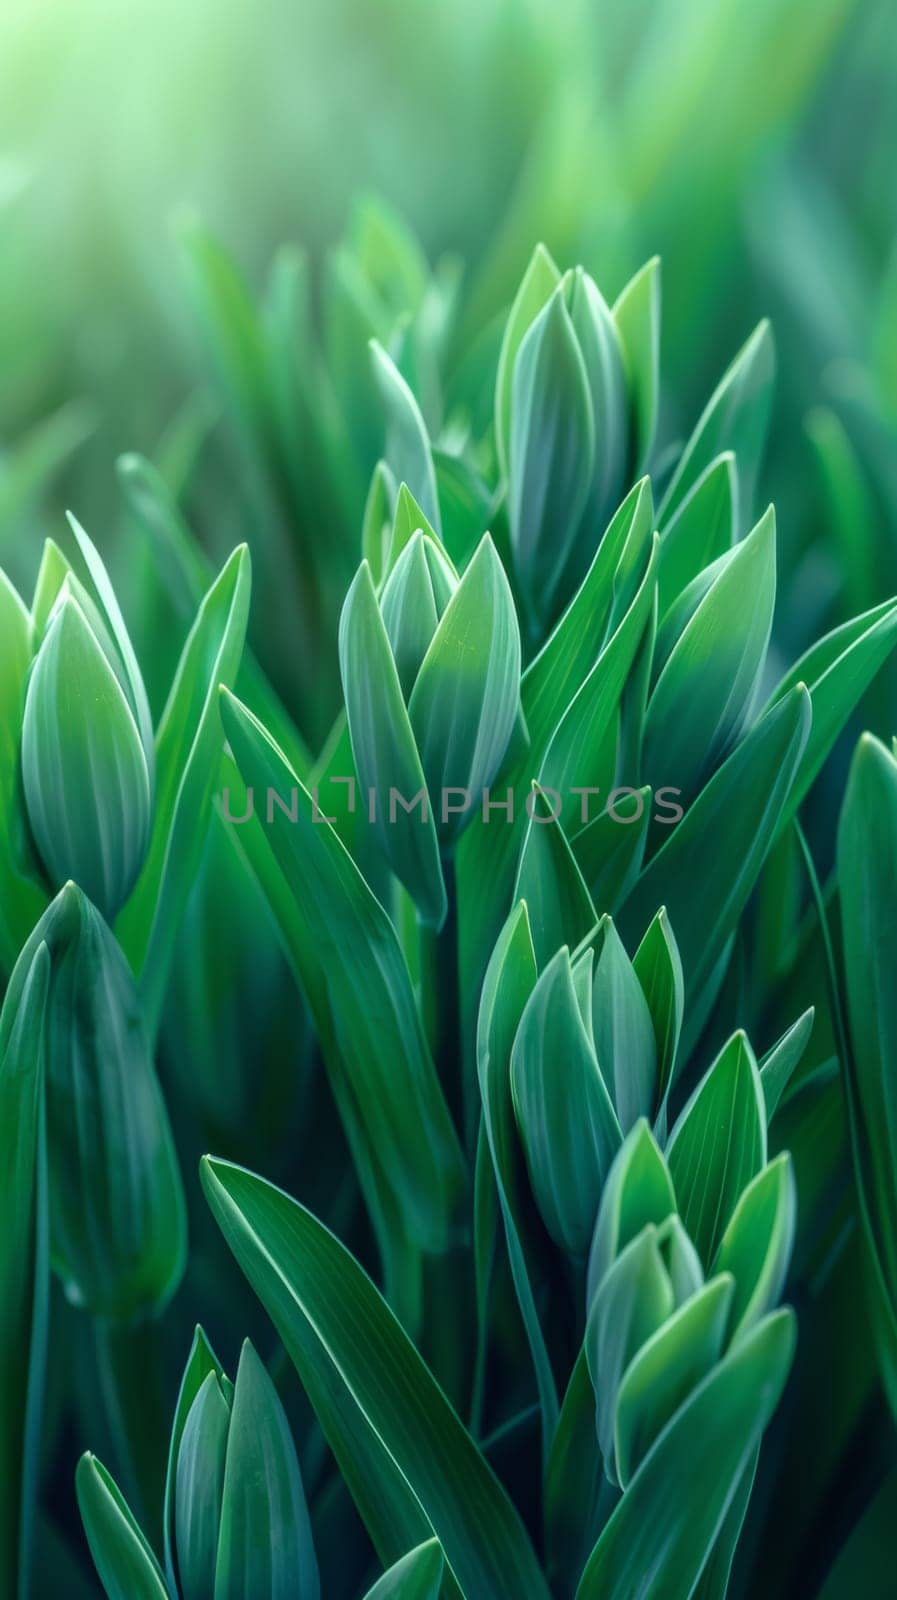 A close up of a bunch of green plants with some flowers, AI by starush